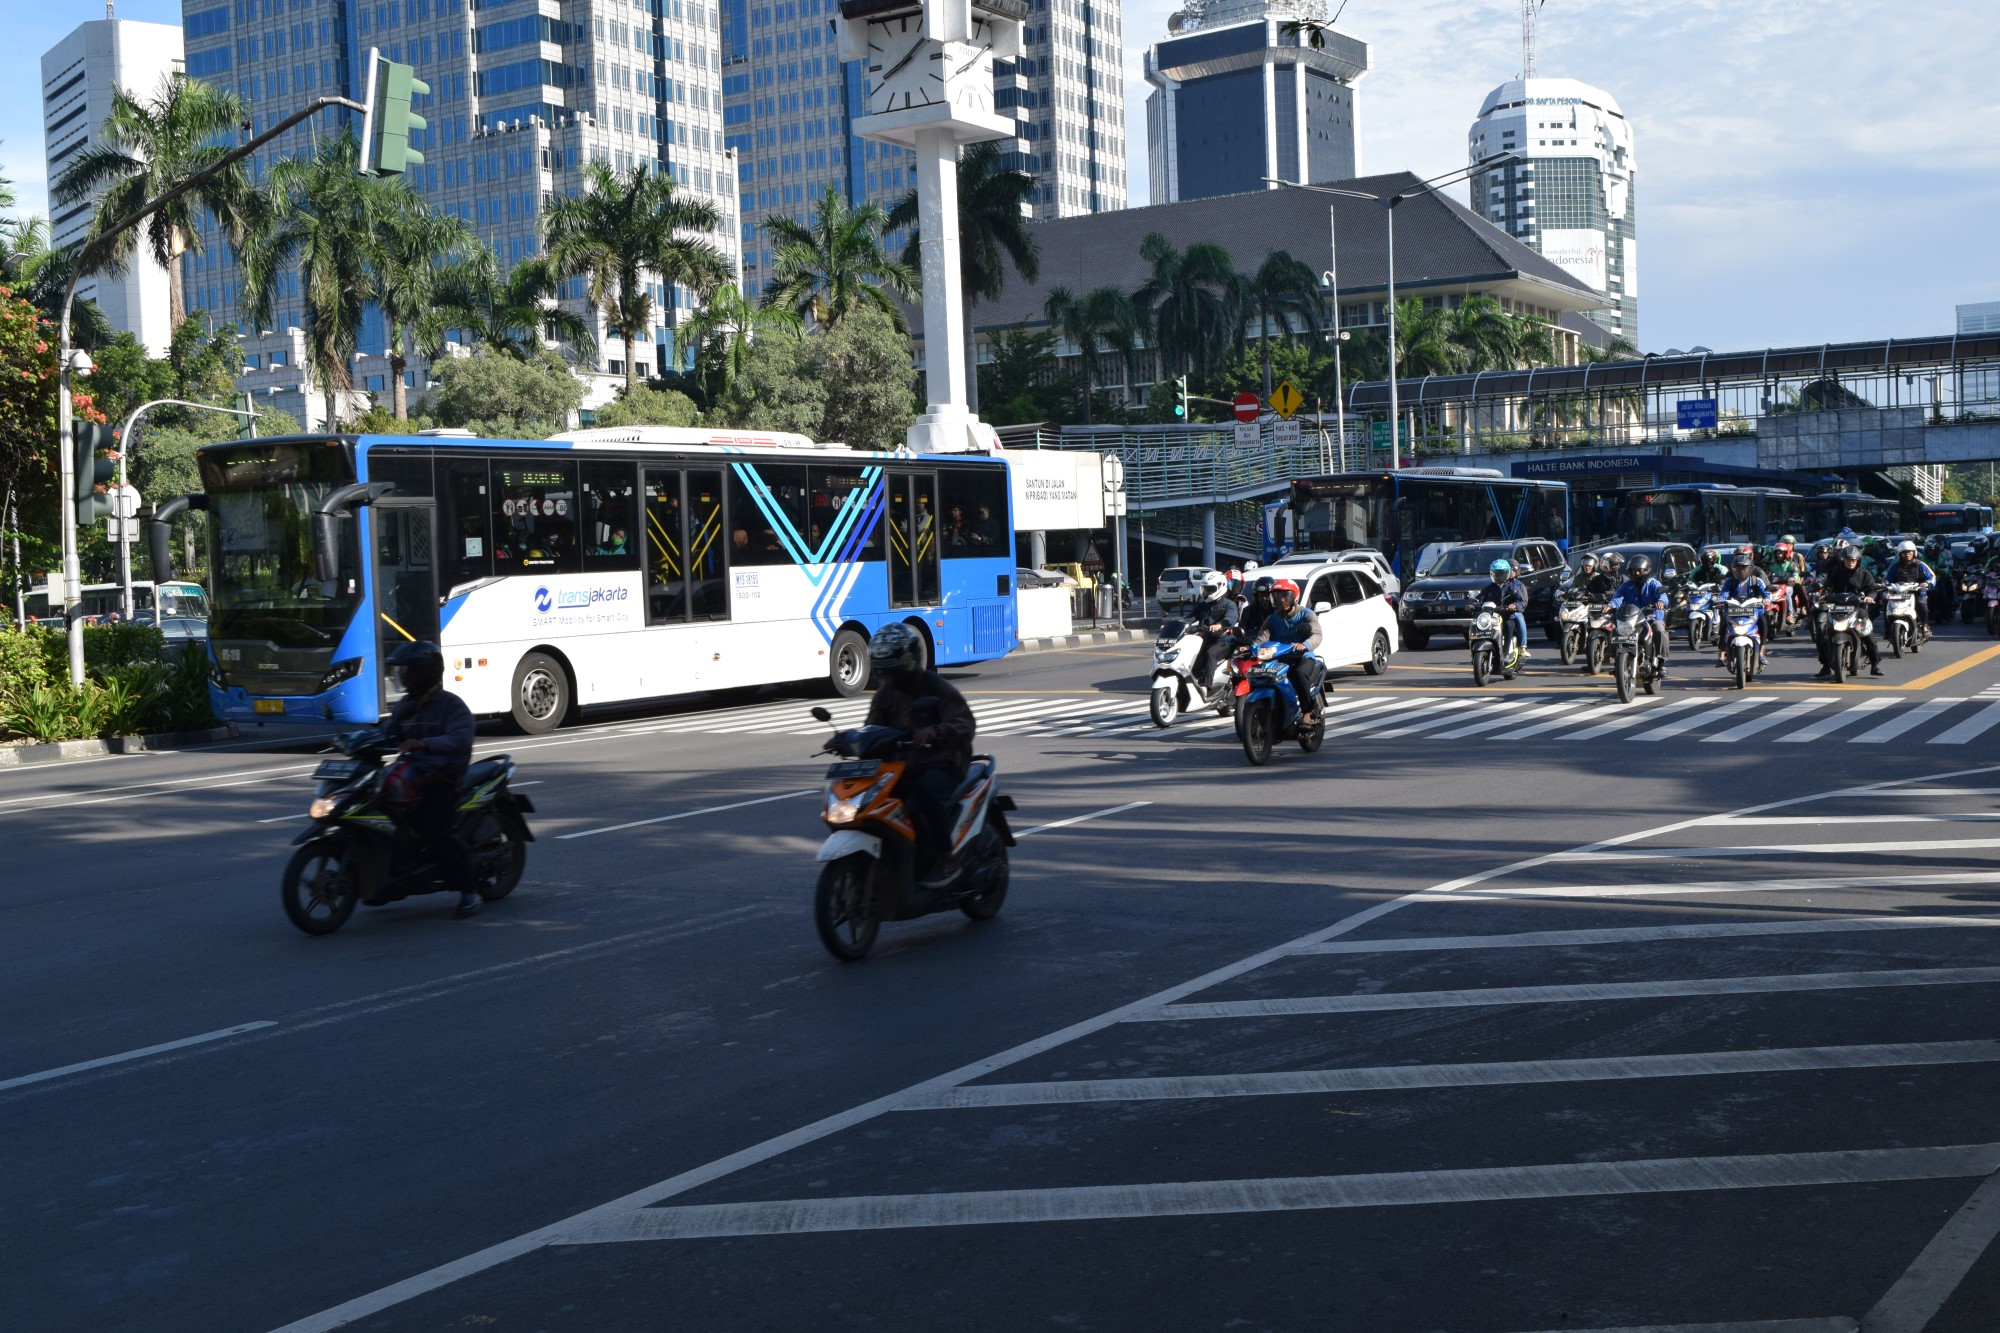 Buses in Indonesia